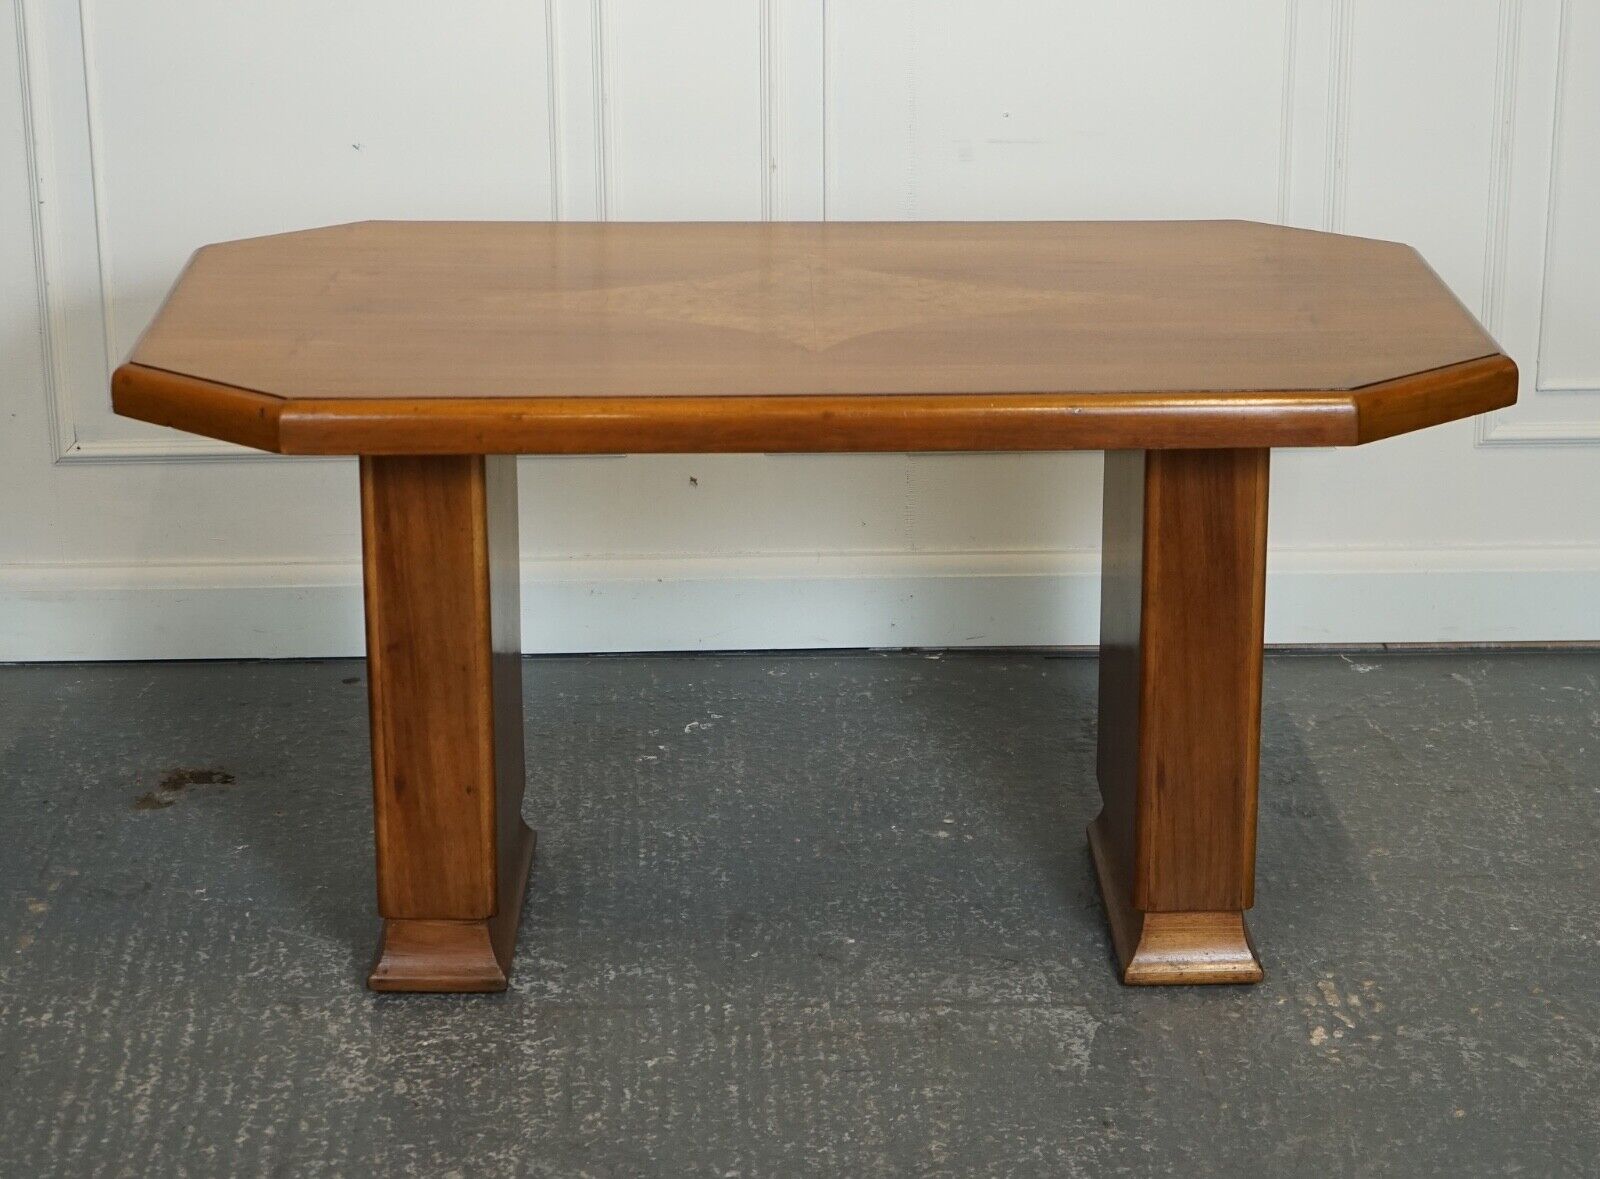 VINTAGE ART DECO WALNUT DINING TABLE 4 TO 6 PERSON J1